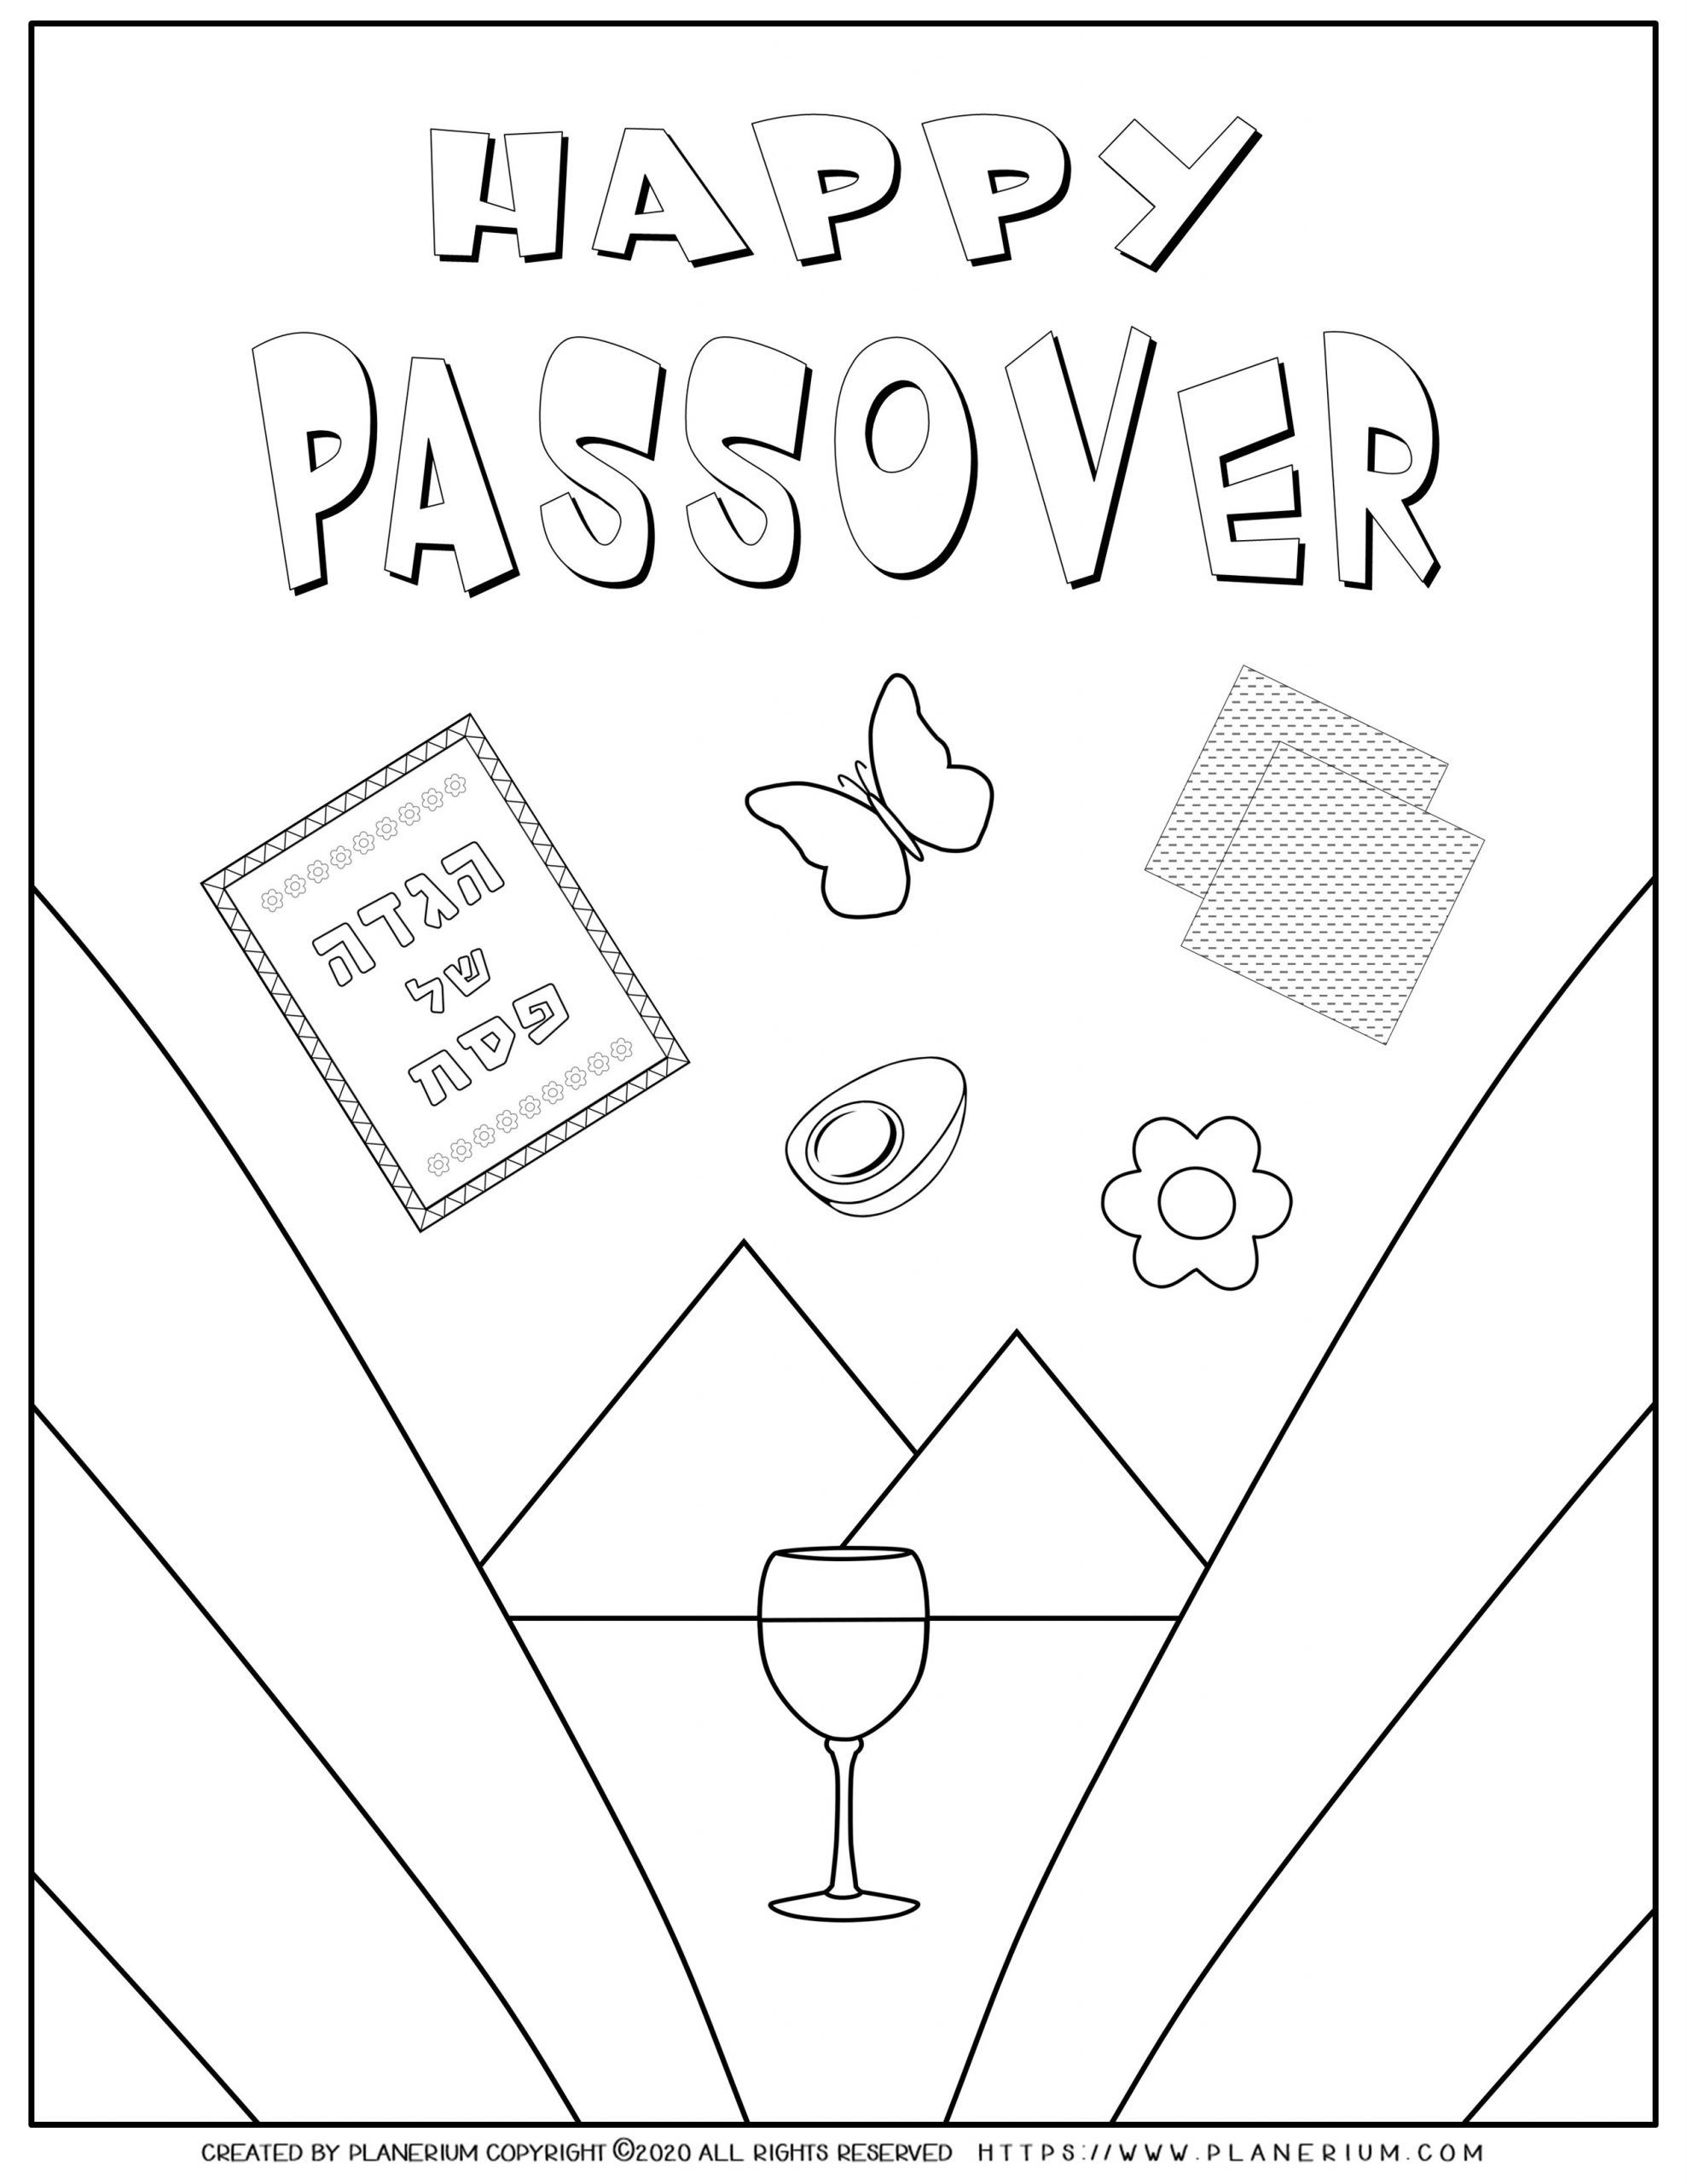 passover-coloring-page-happy-passover-planerium